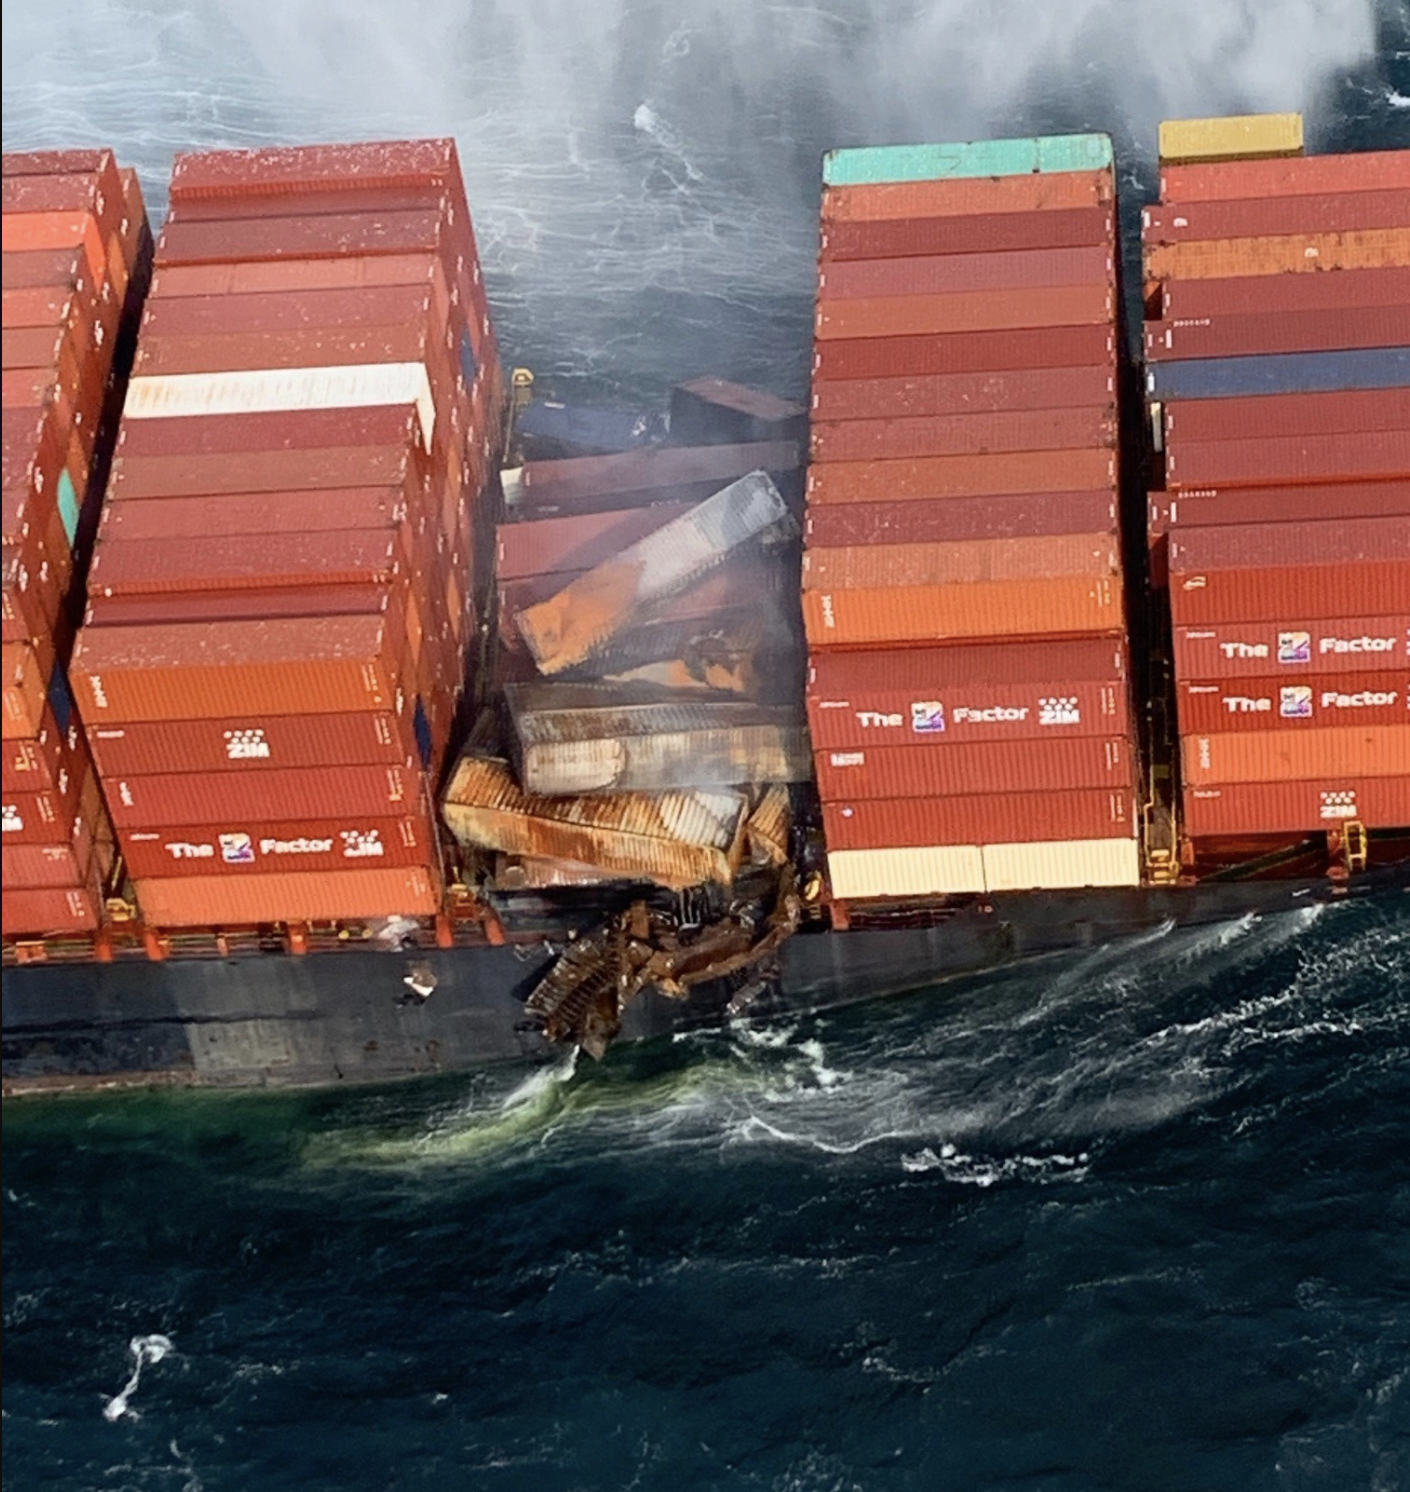 Damaged containers